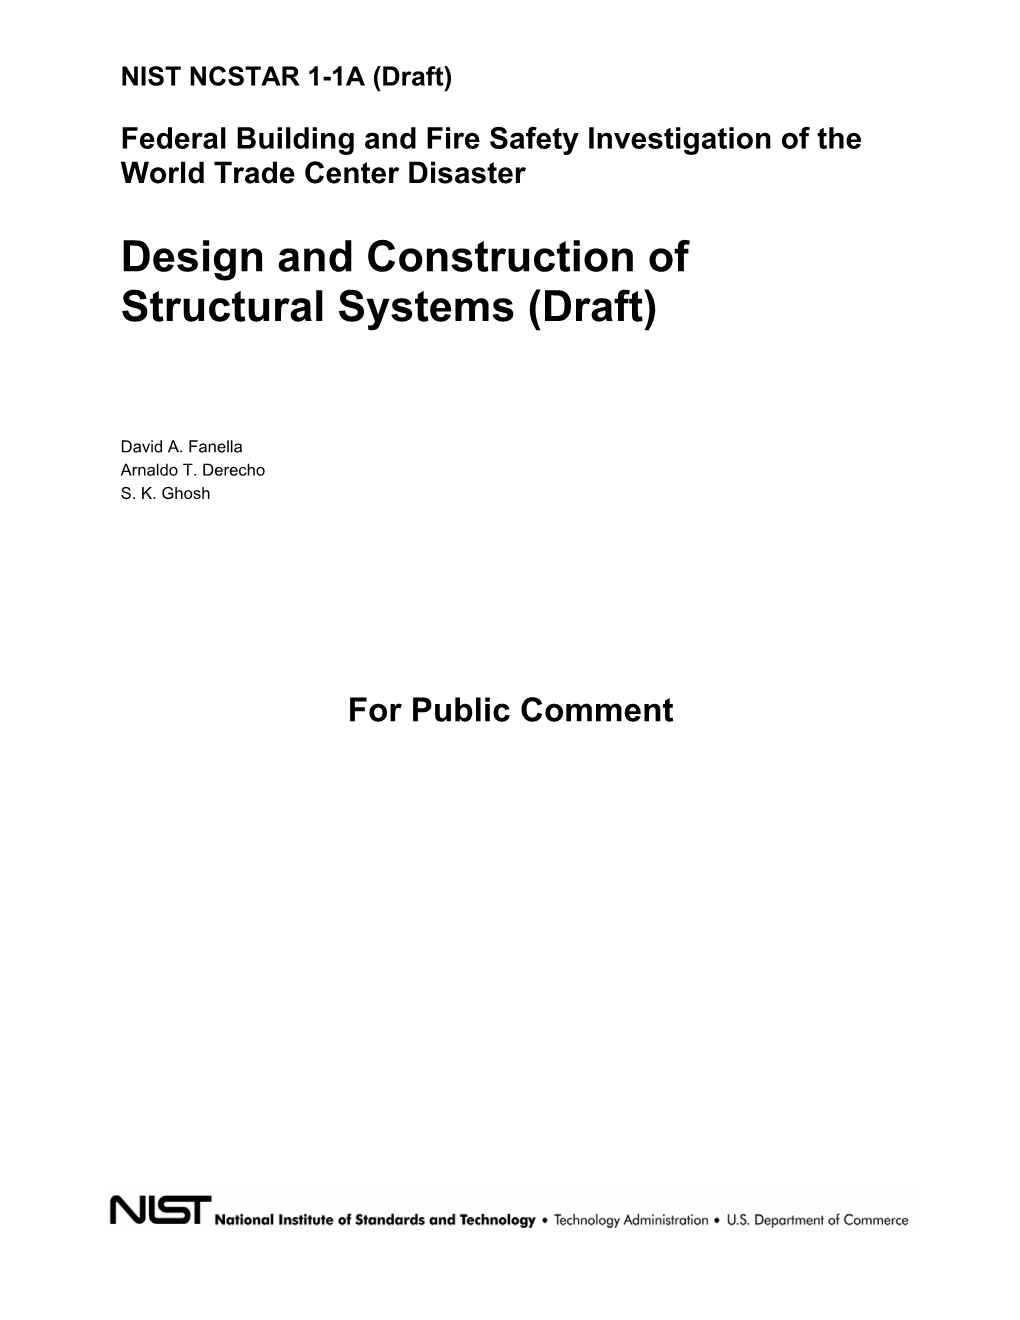 Design and Construction of Structural Systems (Draft)